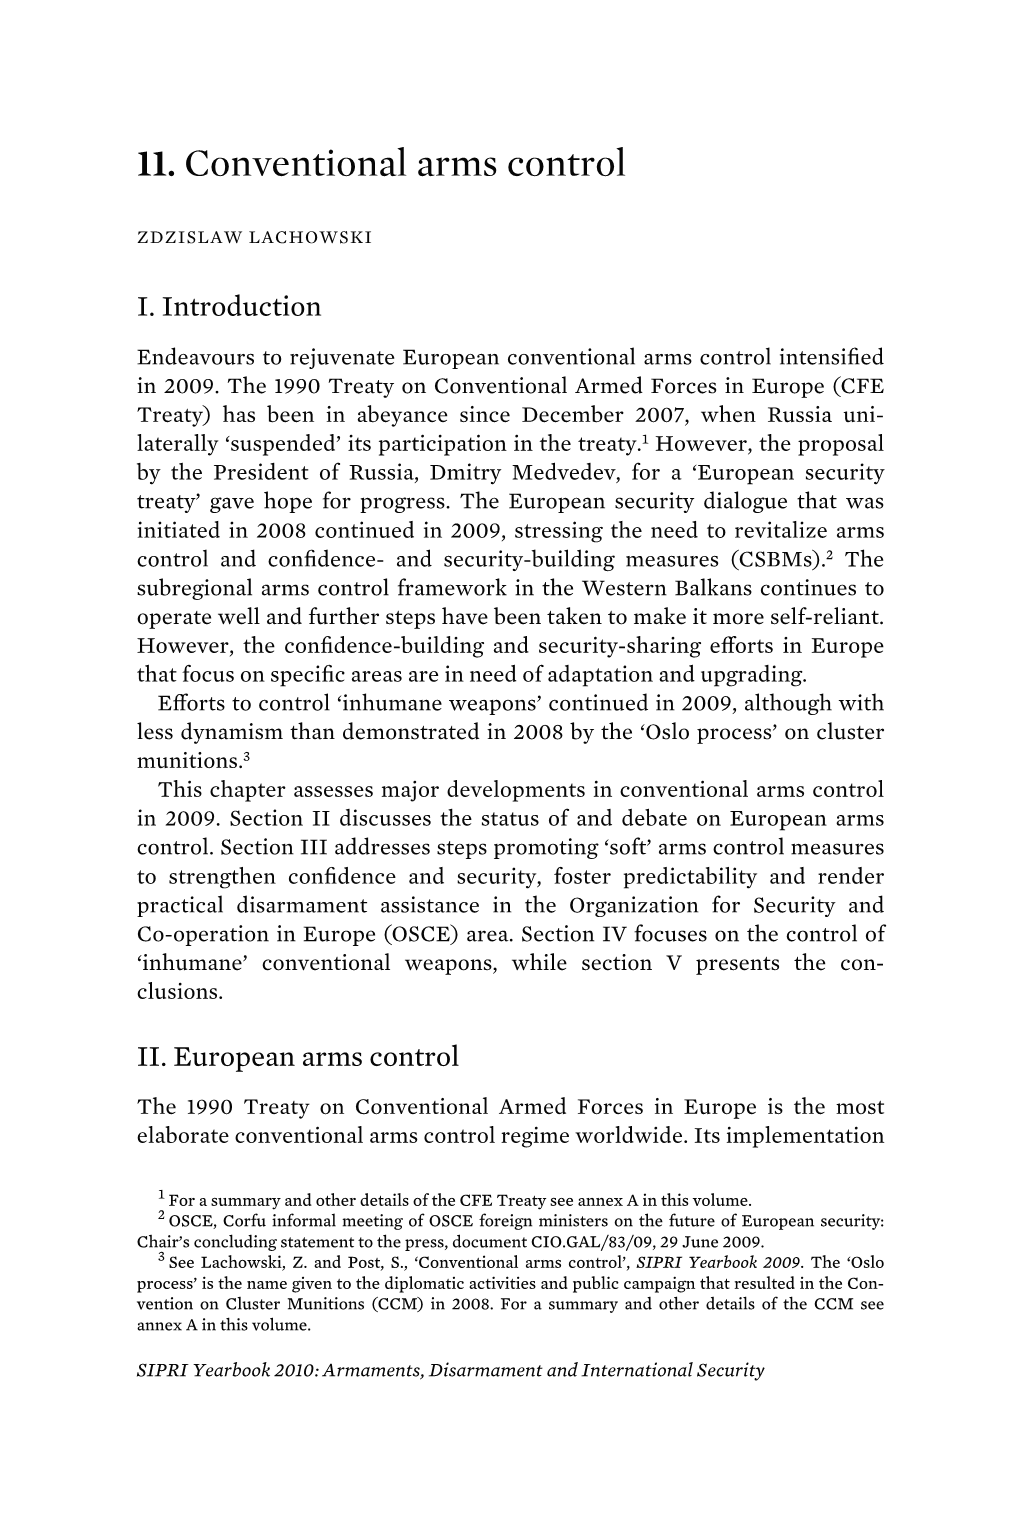 SIPRI Yearbook 2010: Armaments, Disarmament and International Security 426 NON-PROLIFERATION, ARMS CONTROL and DISARMAMENT, 2009